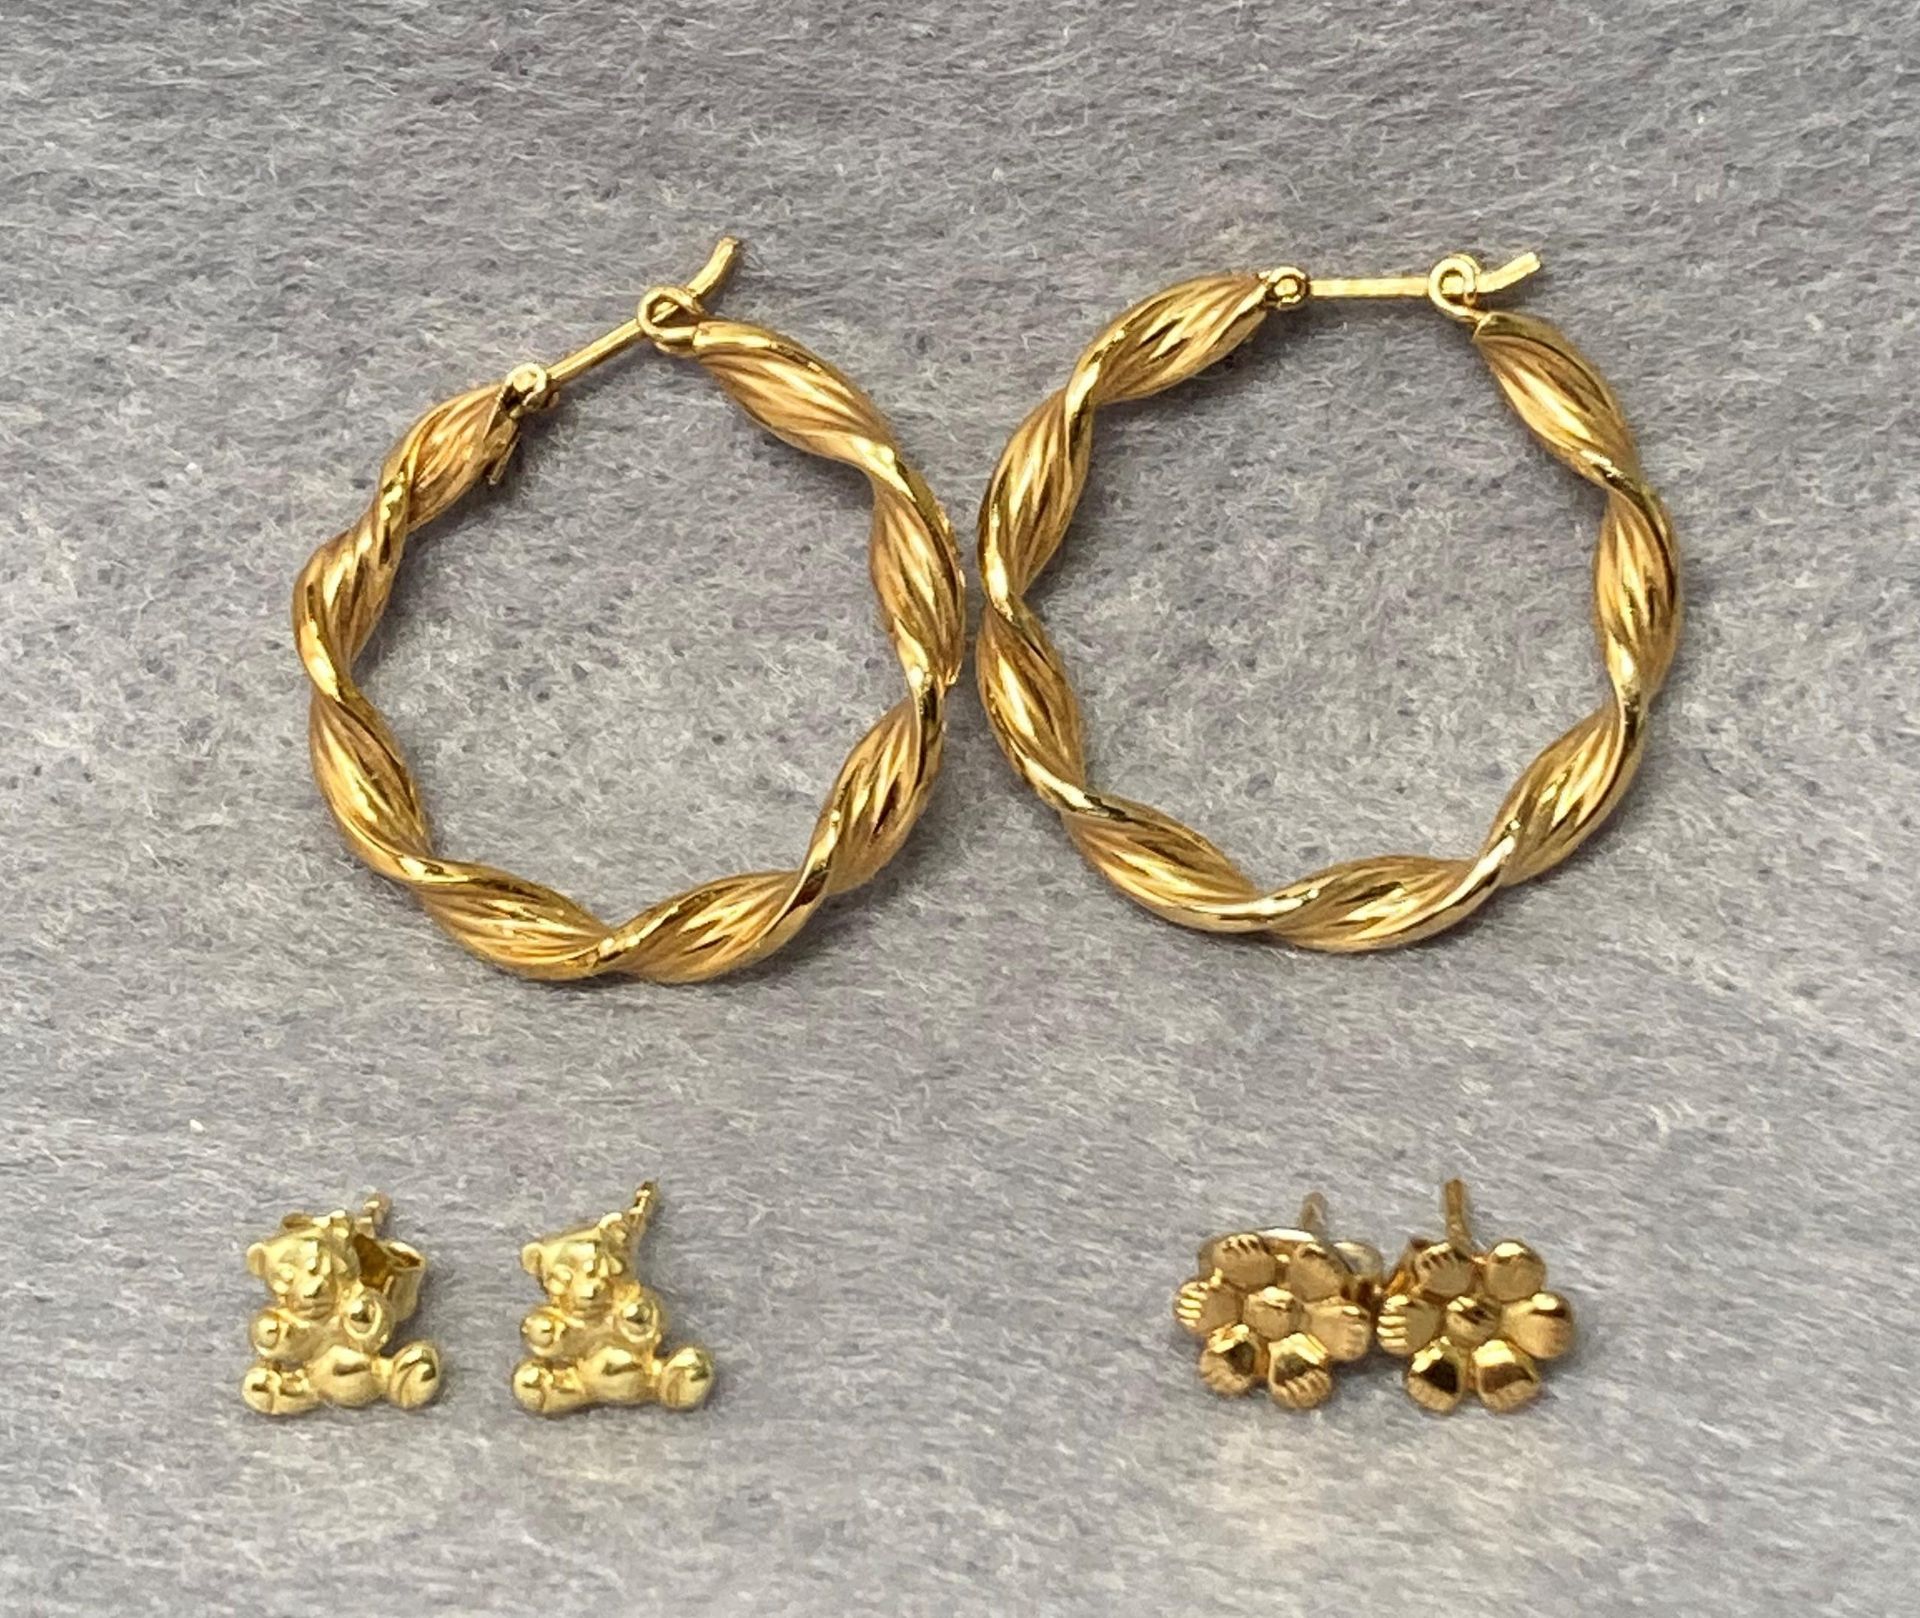 Two pairs of 9ct gold earrings - a twisted hoop pair and a flower stud pair together with a pair of